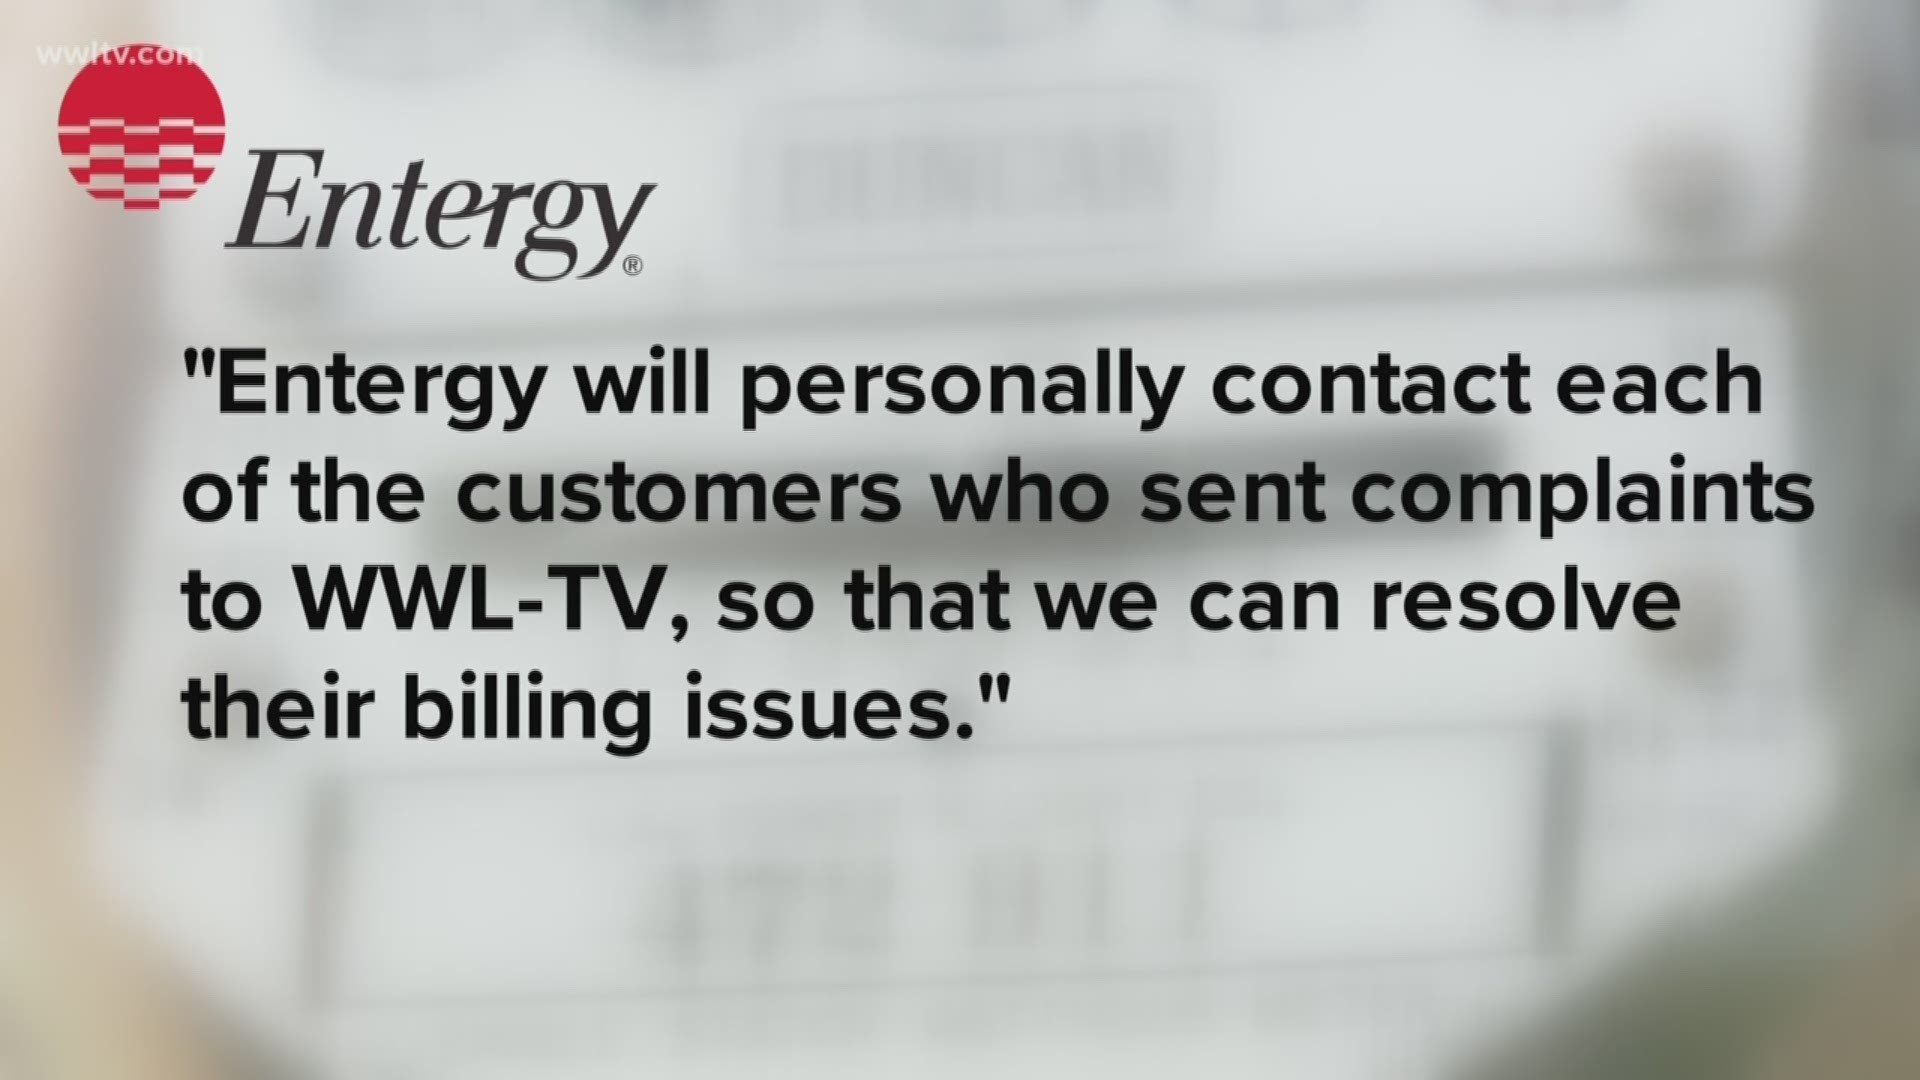 A hold be placed on the customers' accounts to make sure they are charged properly, Entergy said after a report by WWL-TV 